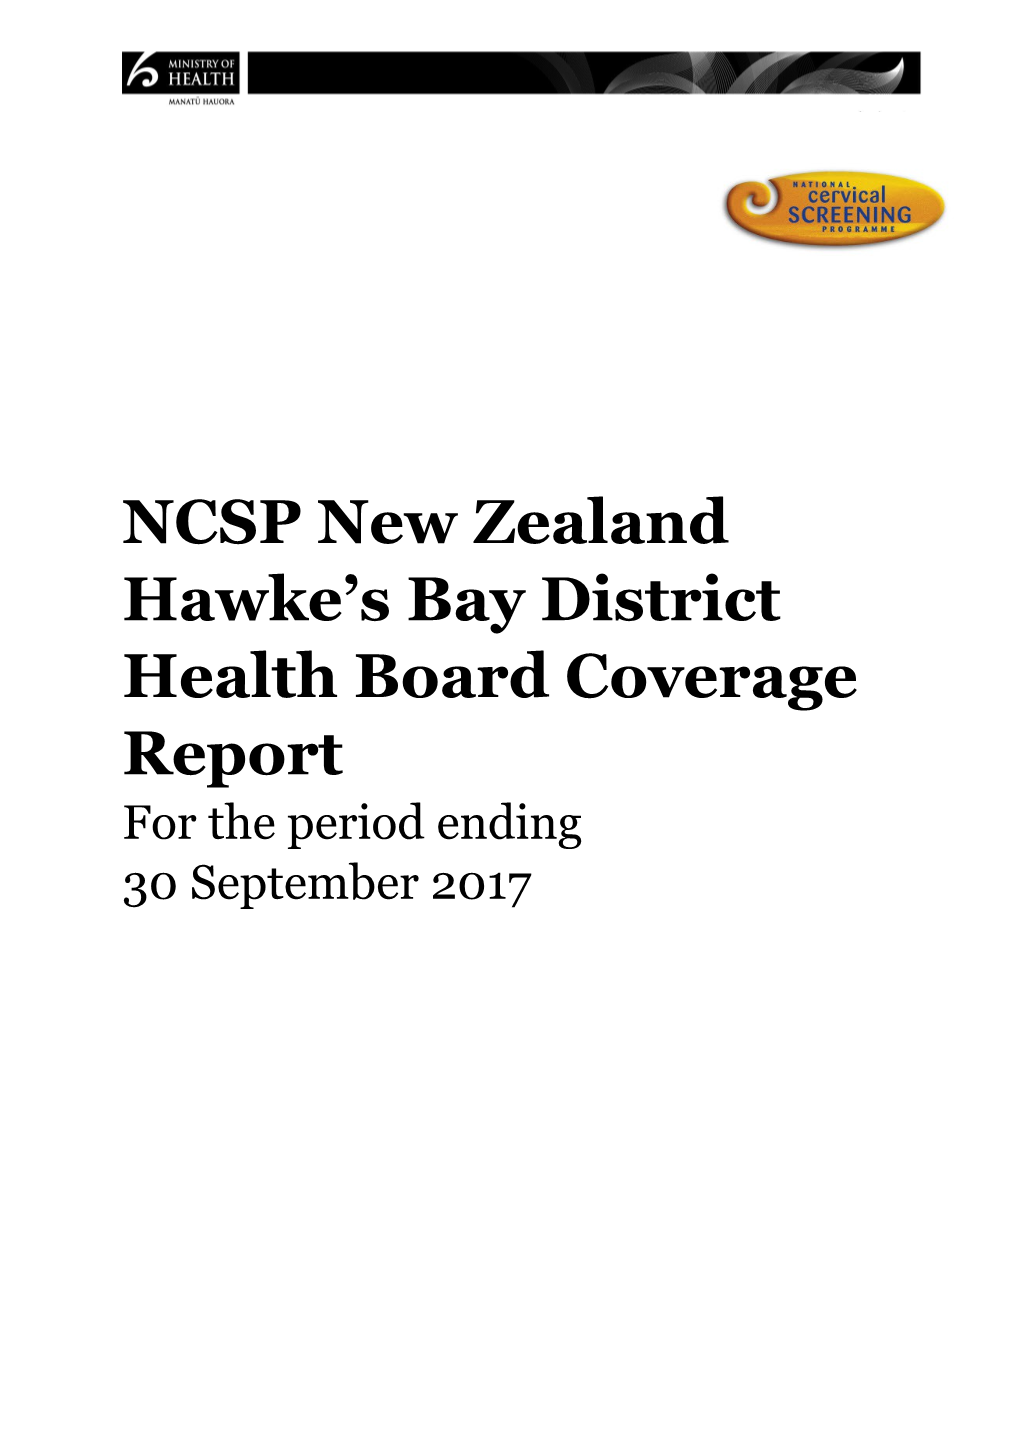 NCSP New Zealand Hawke S Bay District Health Board Coverage Report